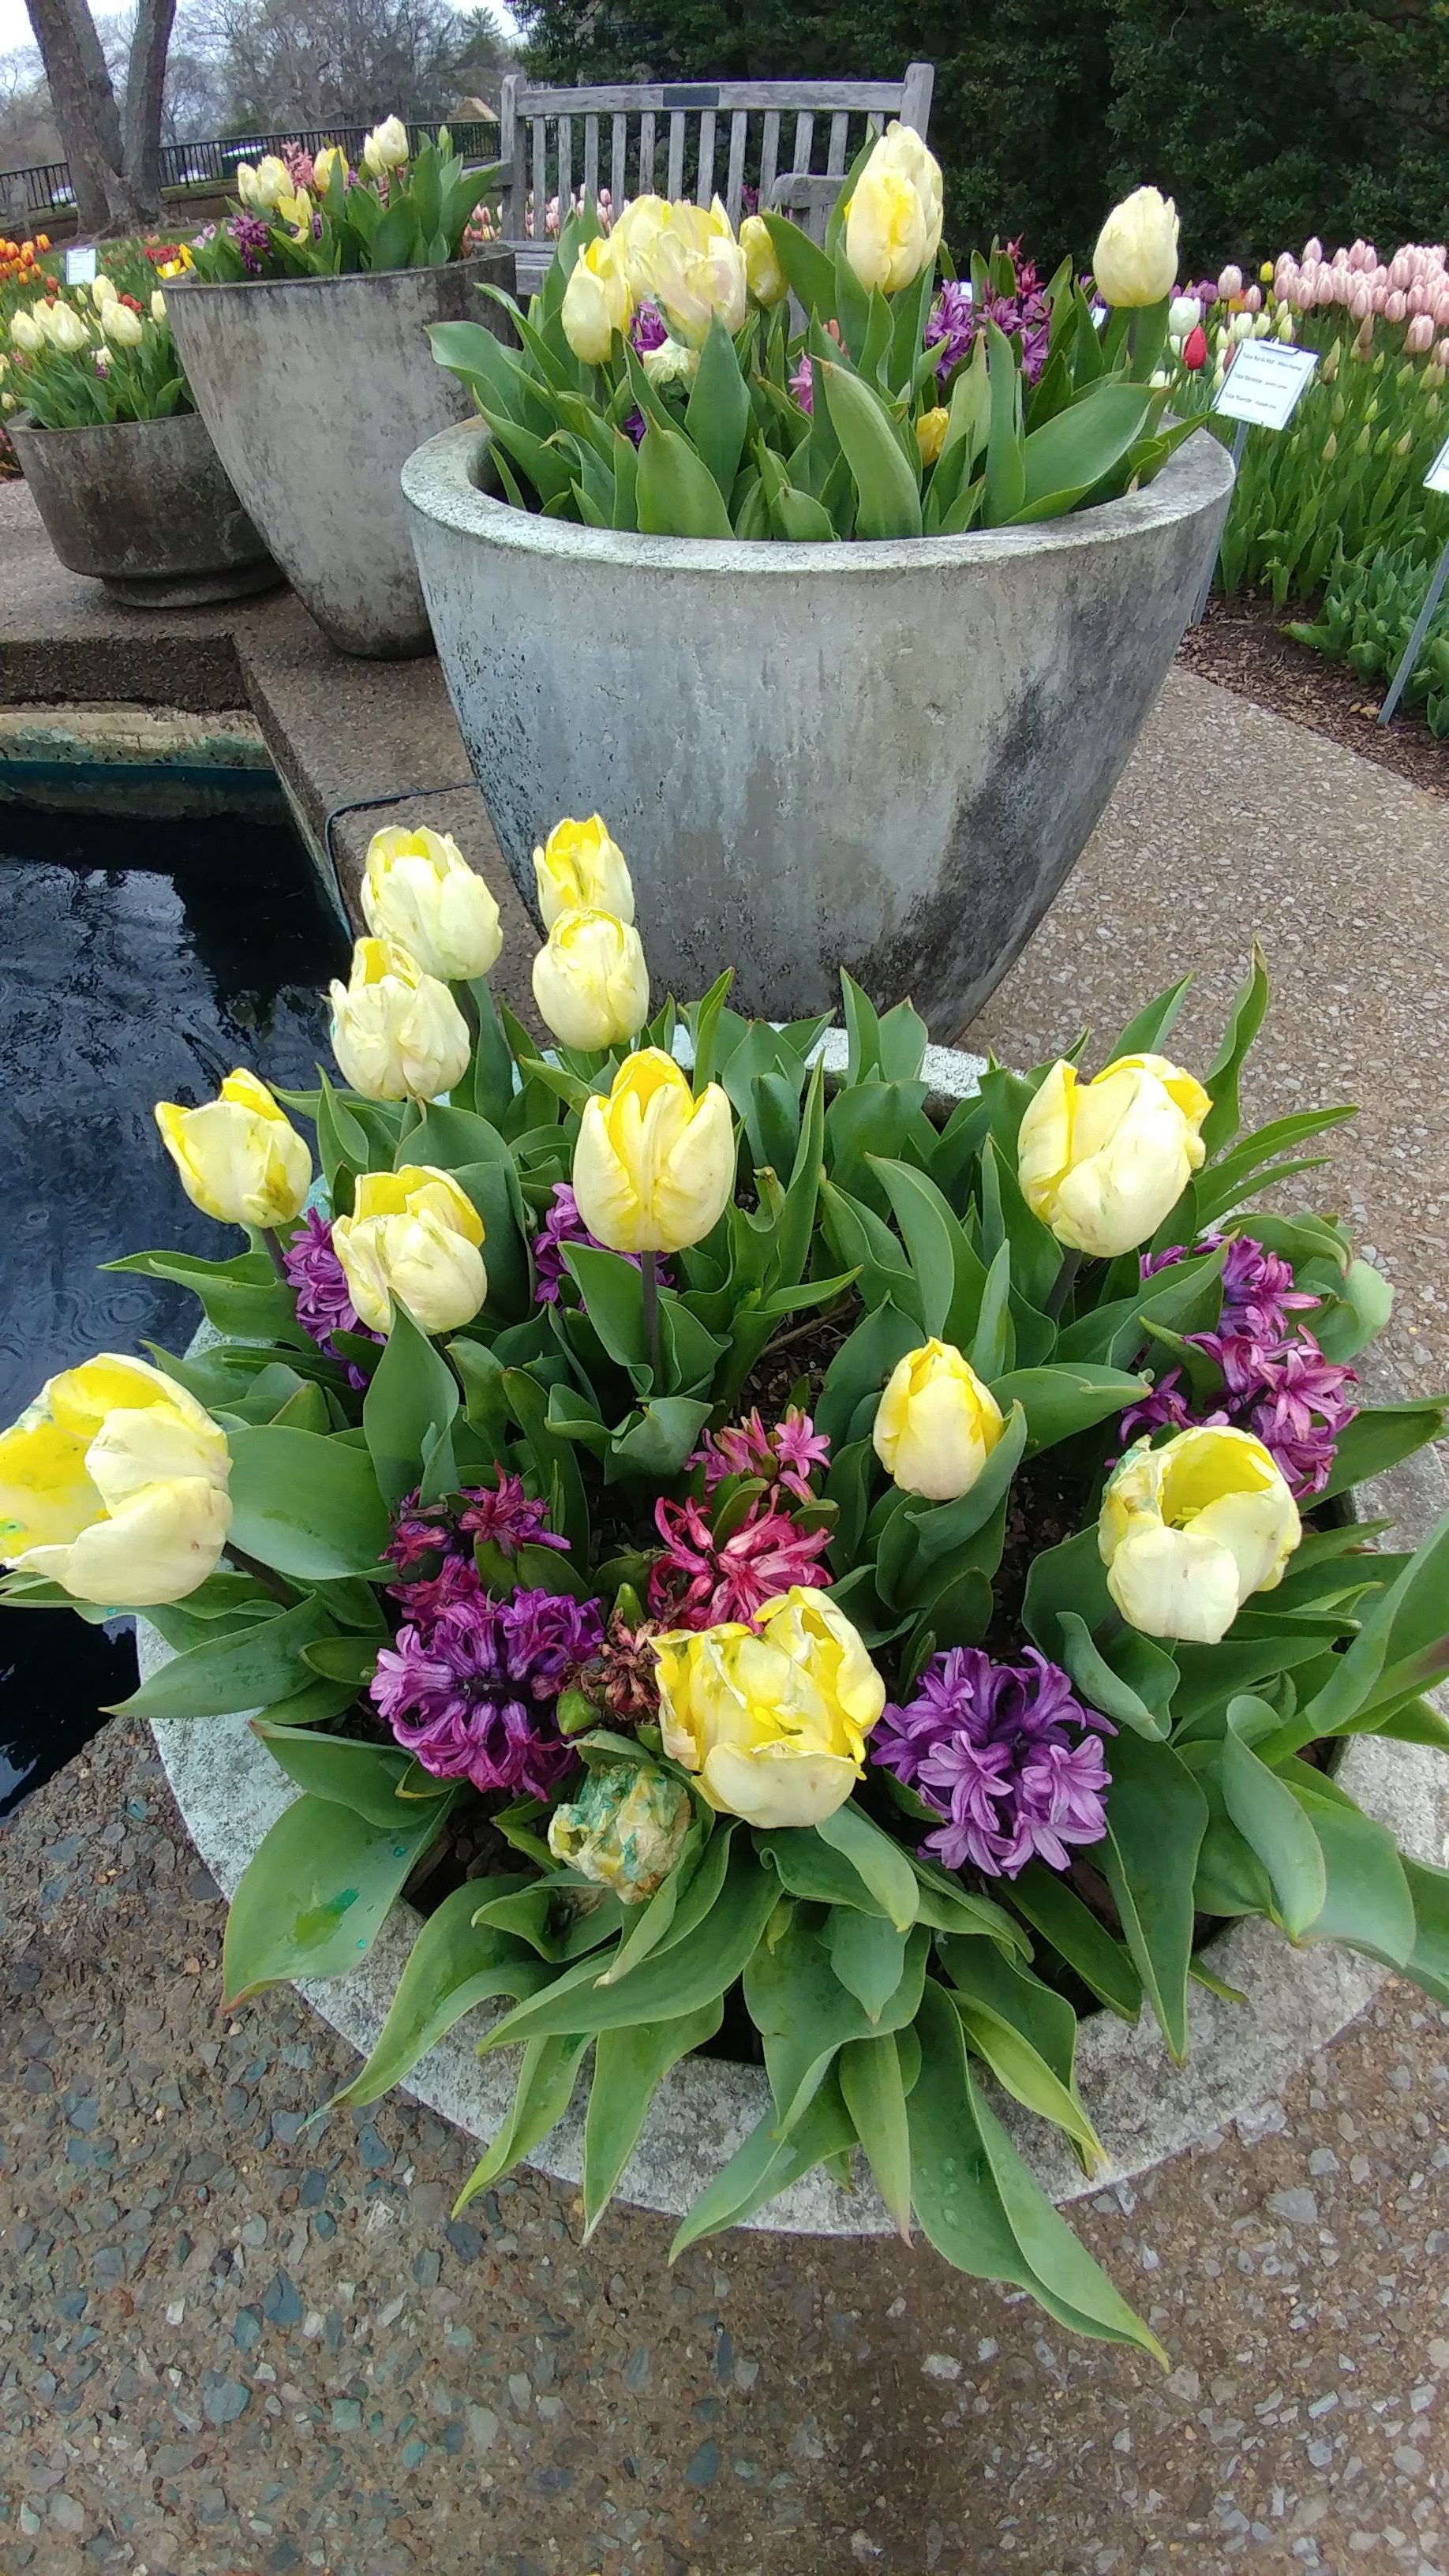 Tulips and hyacinths in a container at Cheekwood